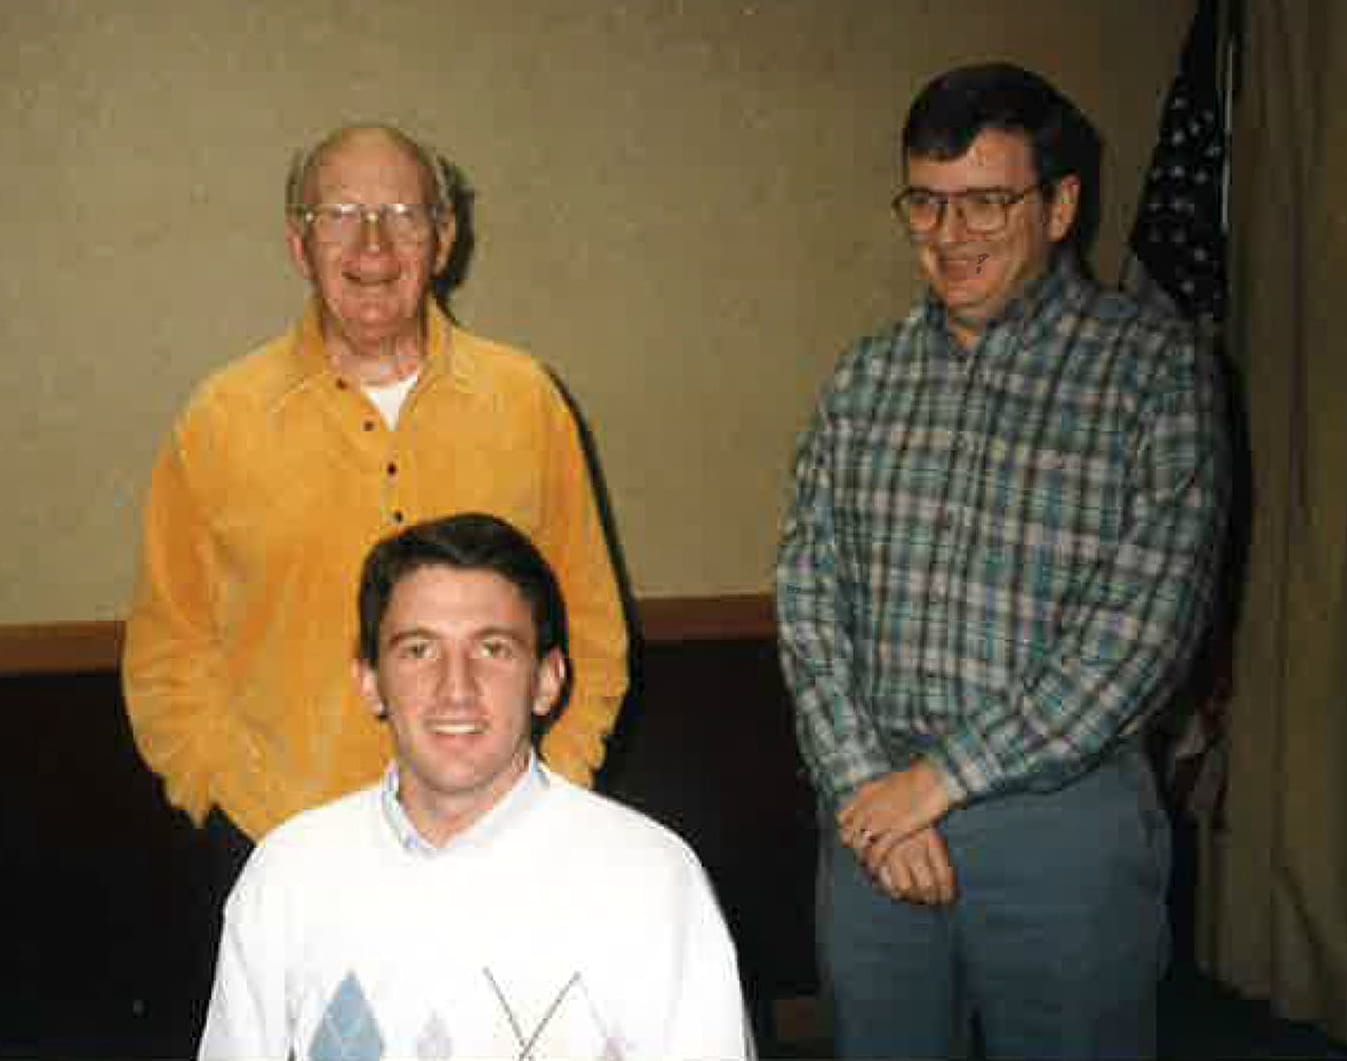 John Warner (front), with his dad and his dad’s dad.